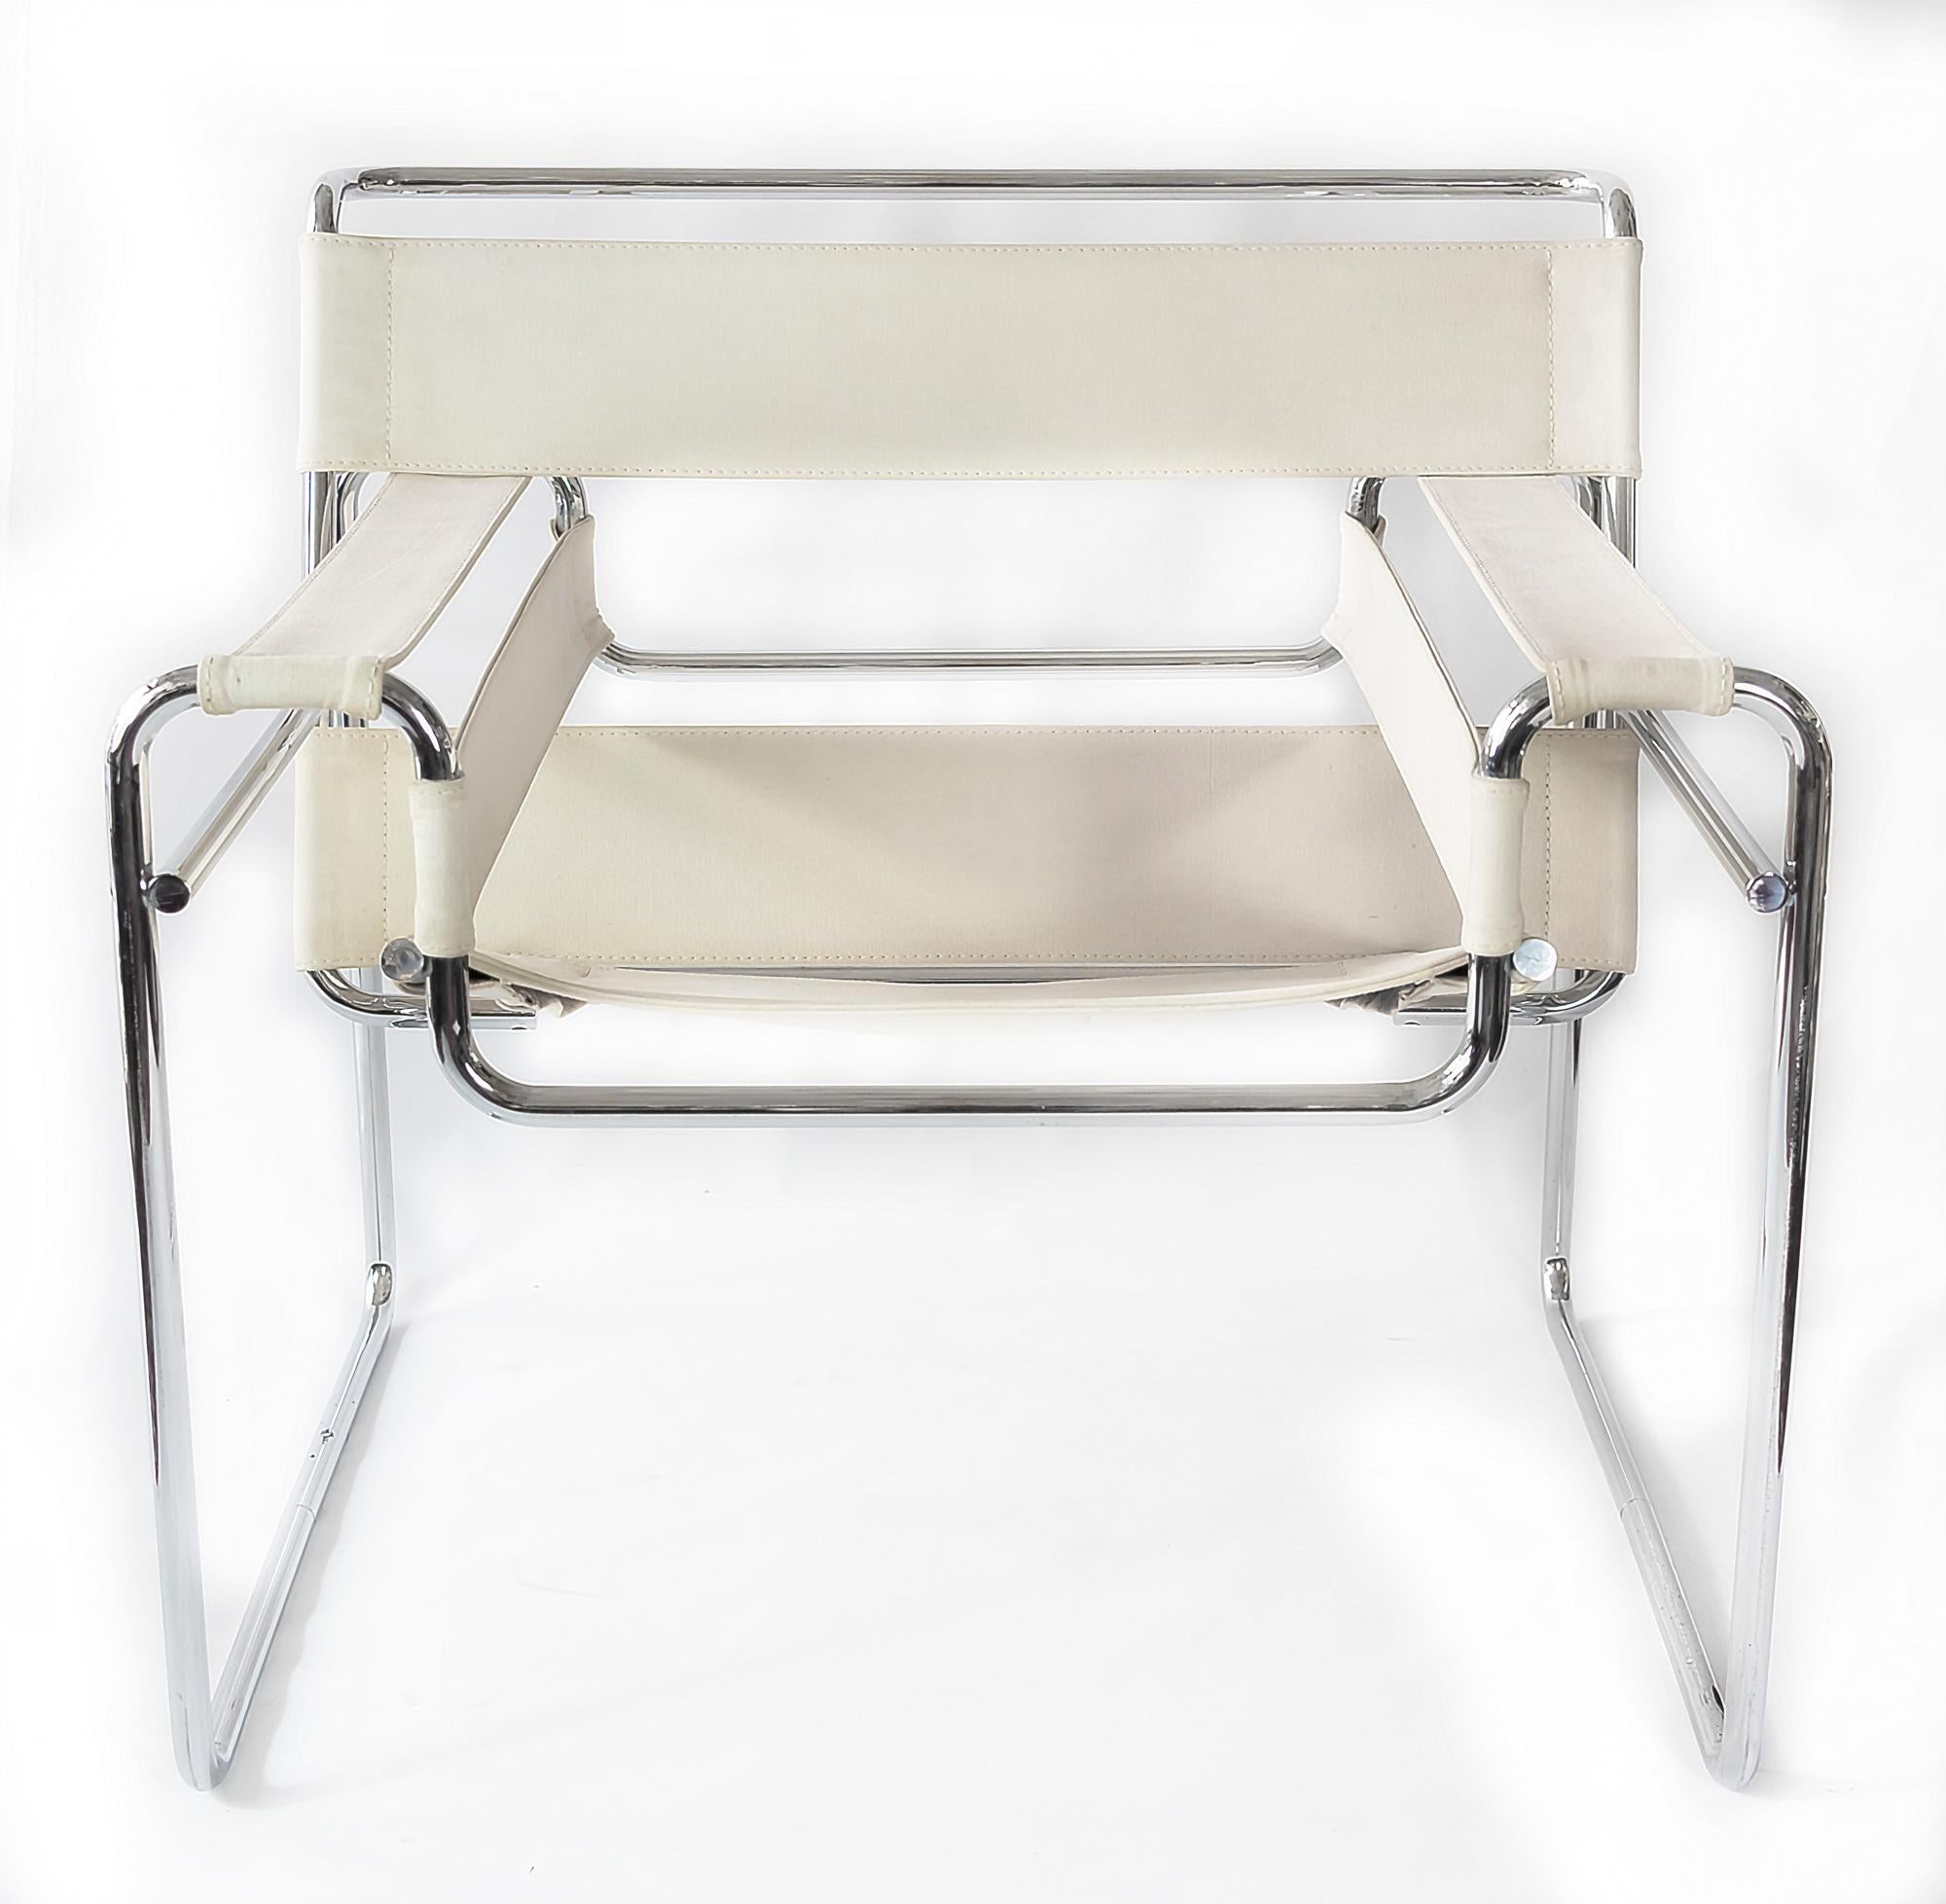 Vintage Wassily chair, designed by Marcel Breuer, circa 1920.
This item is manufactured circa 1960s by Gavina.
Label GAVINA.
Materials: white colour canvas textile, steel tube frame.

